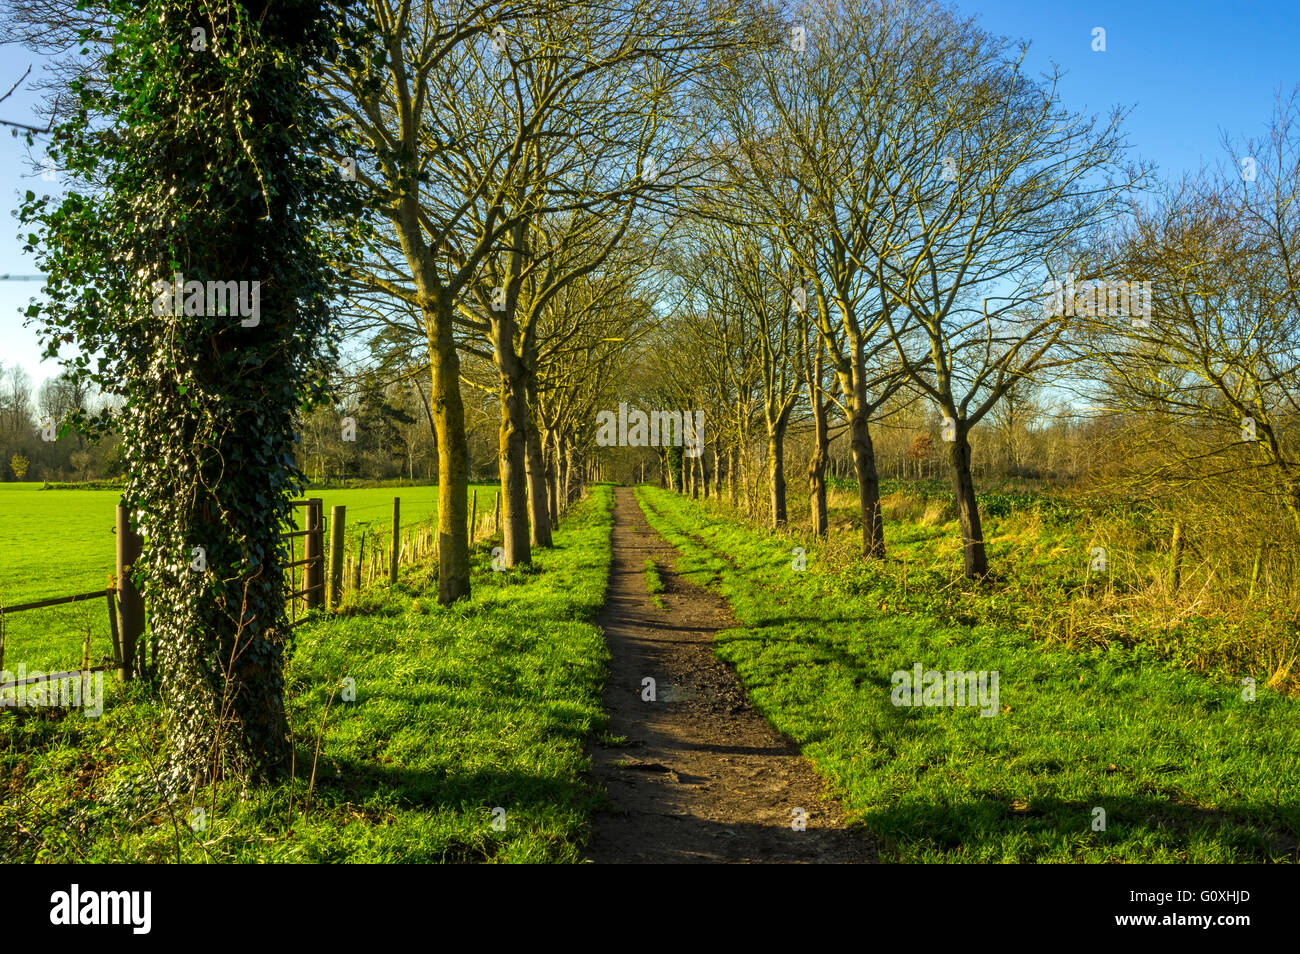 A brdleway through an avenue of trees Stock Photo